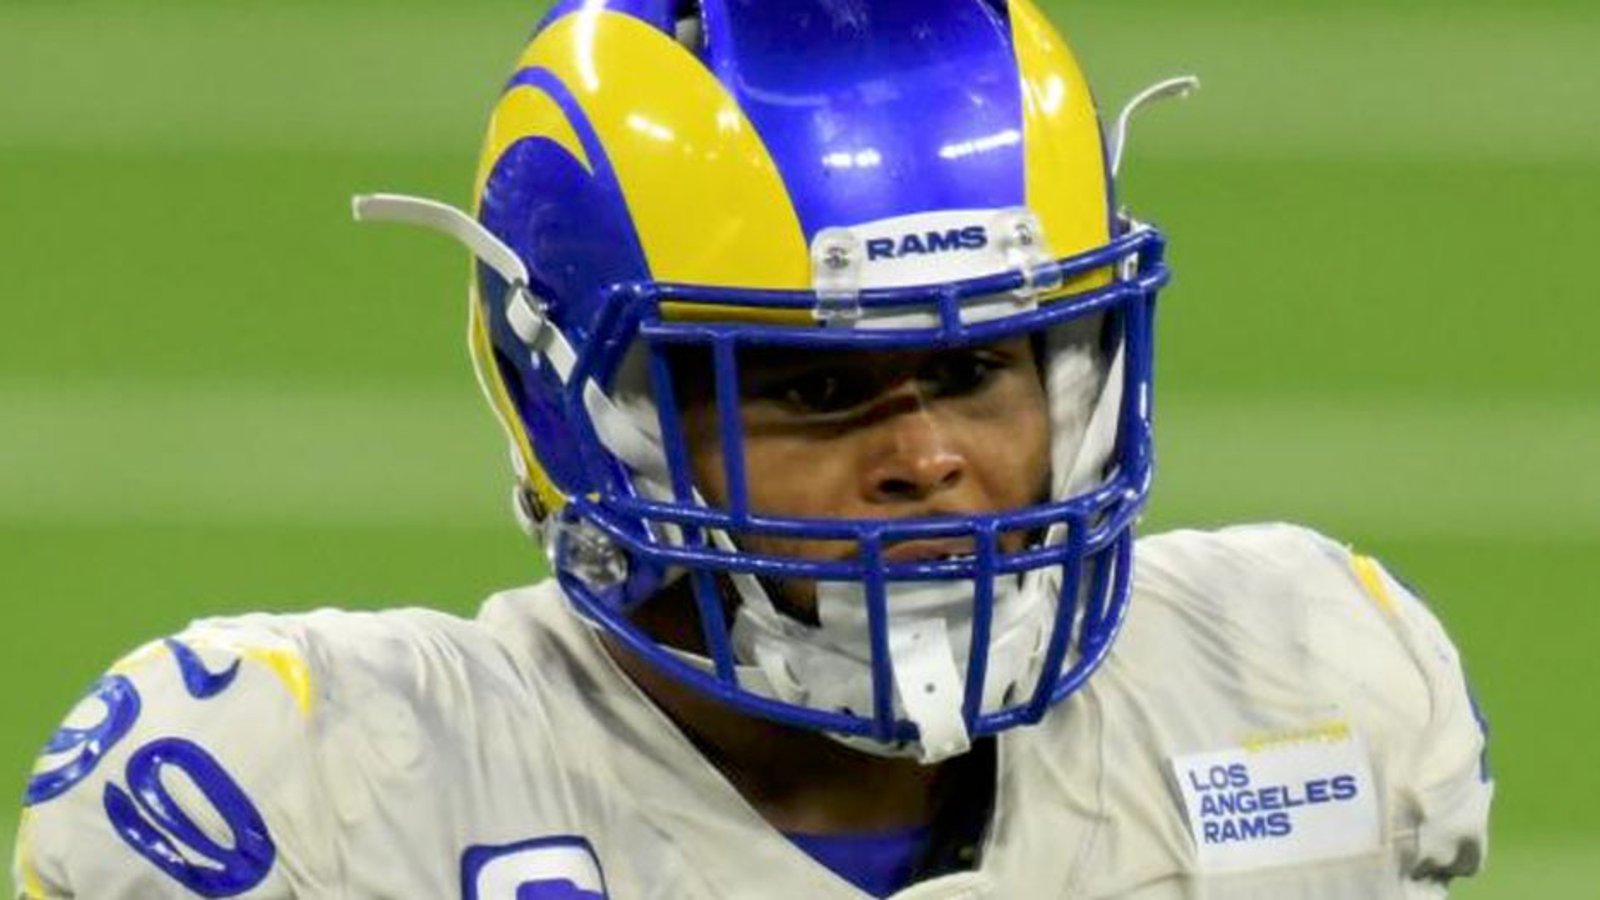 LA Rams defensive tackle Aaaron Donald chokes teammate as part of workout 